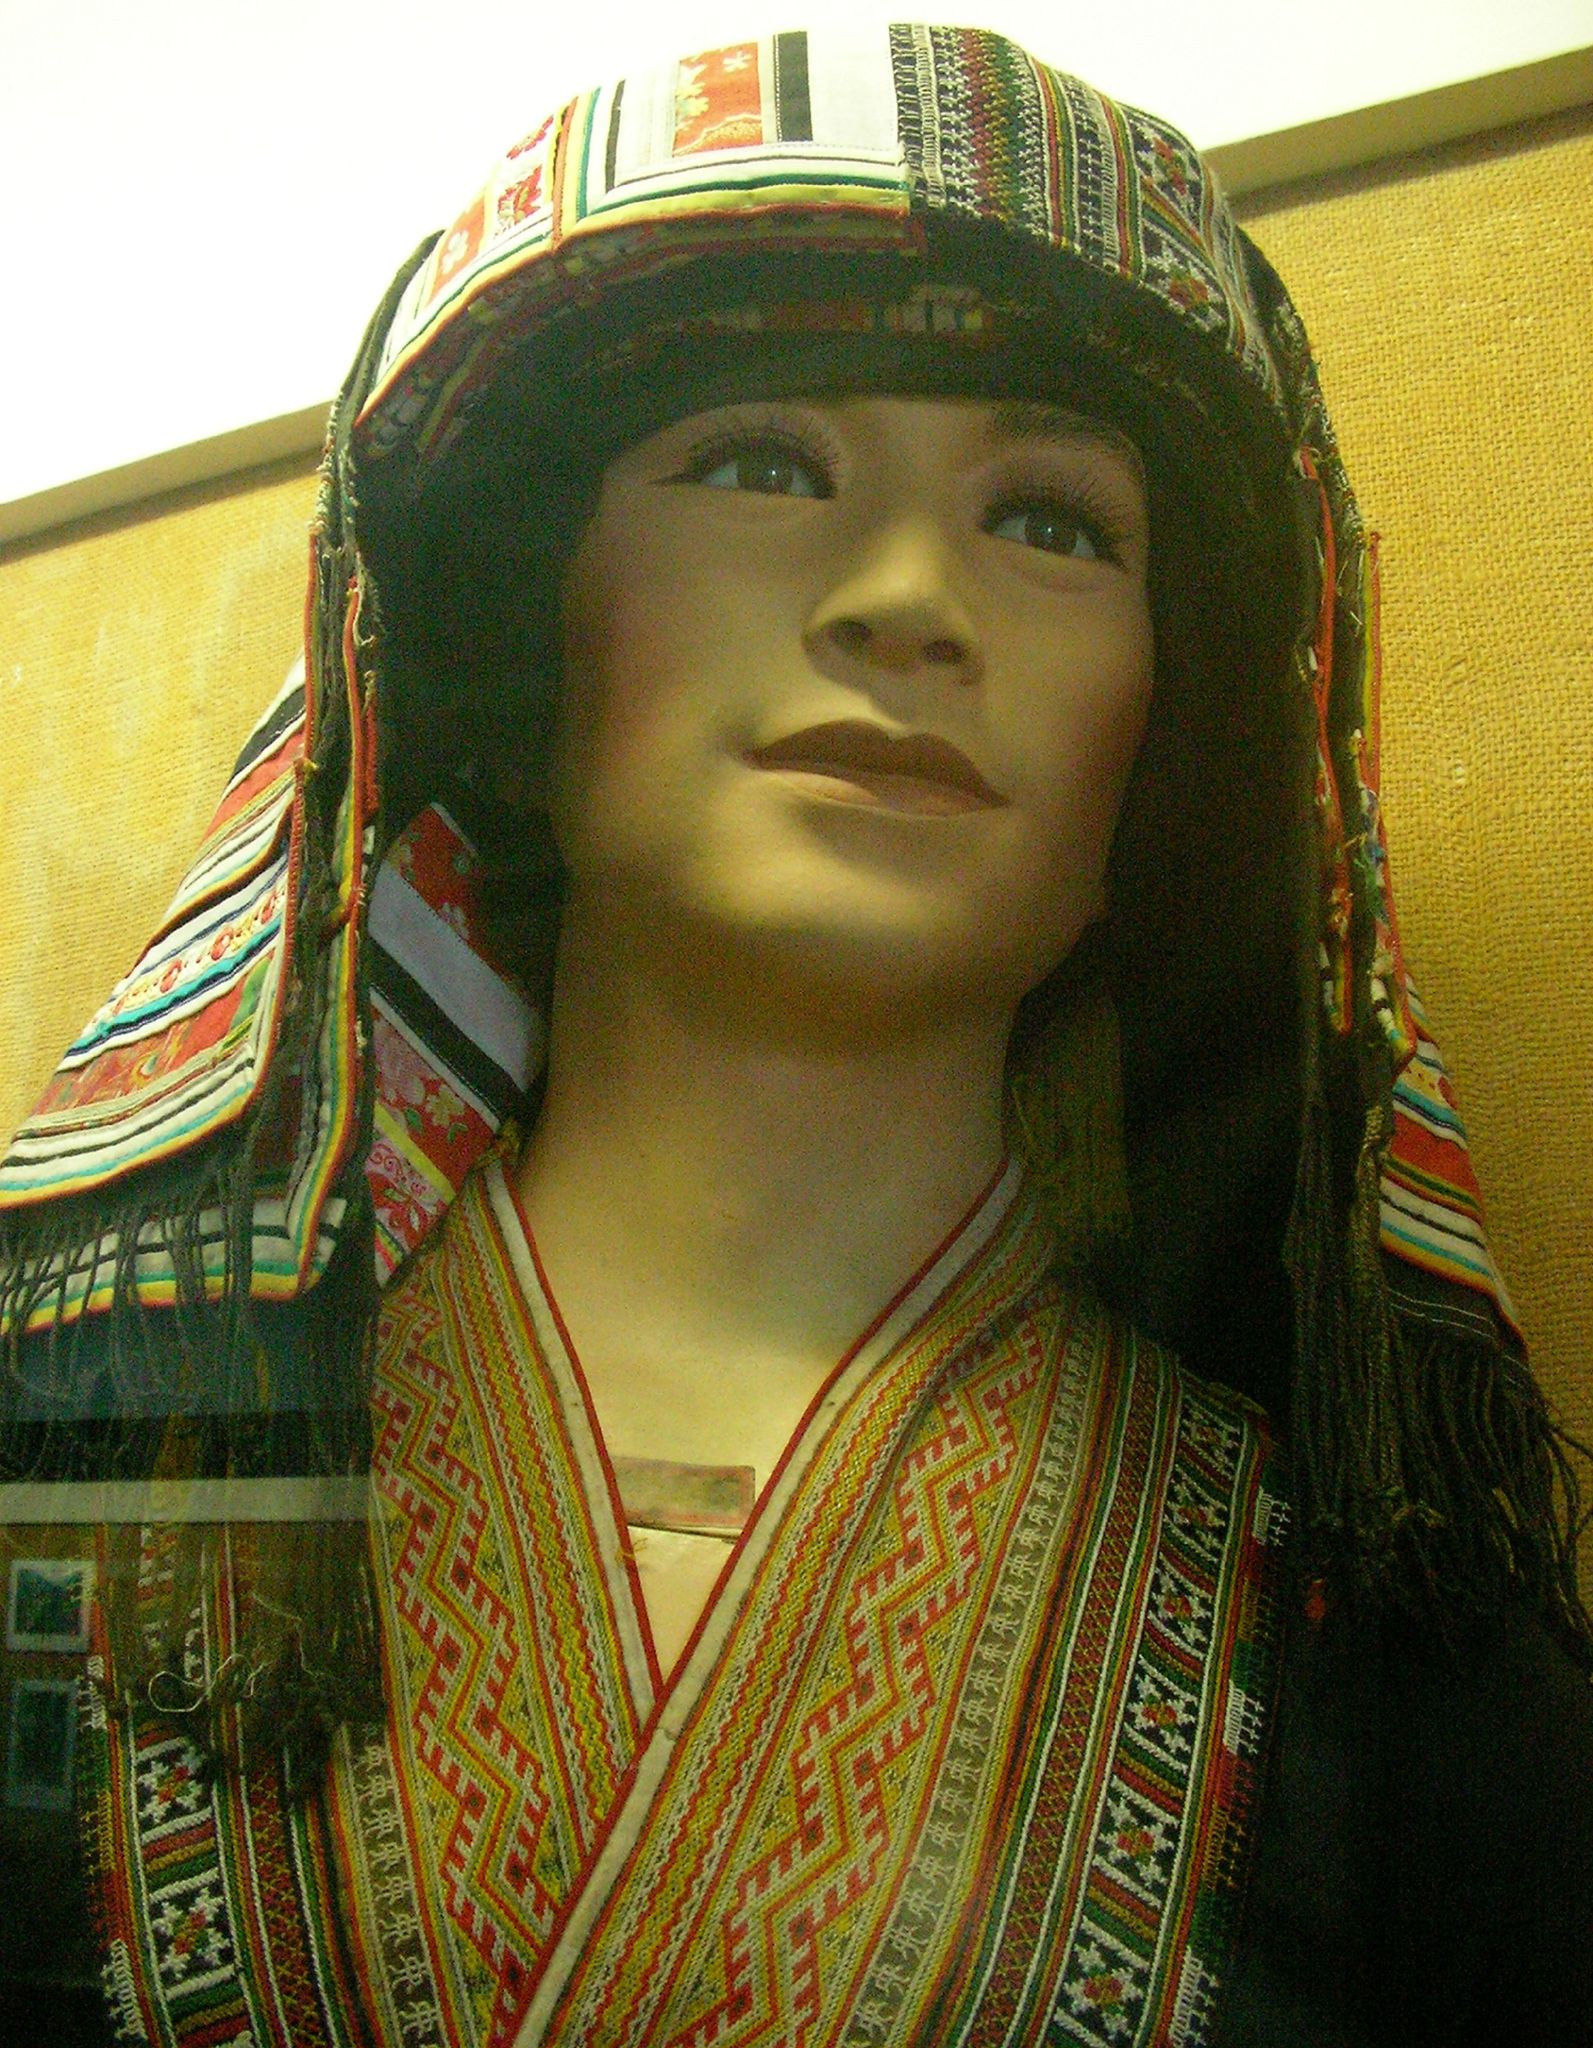 a person wearing a hat and scarf on display